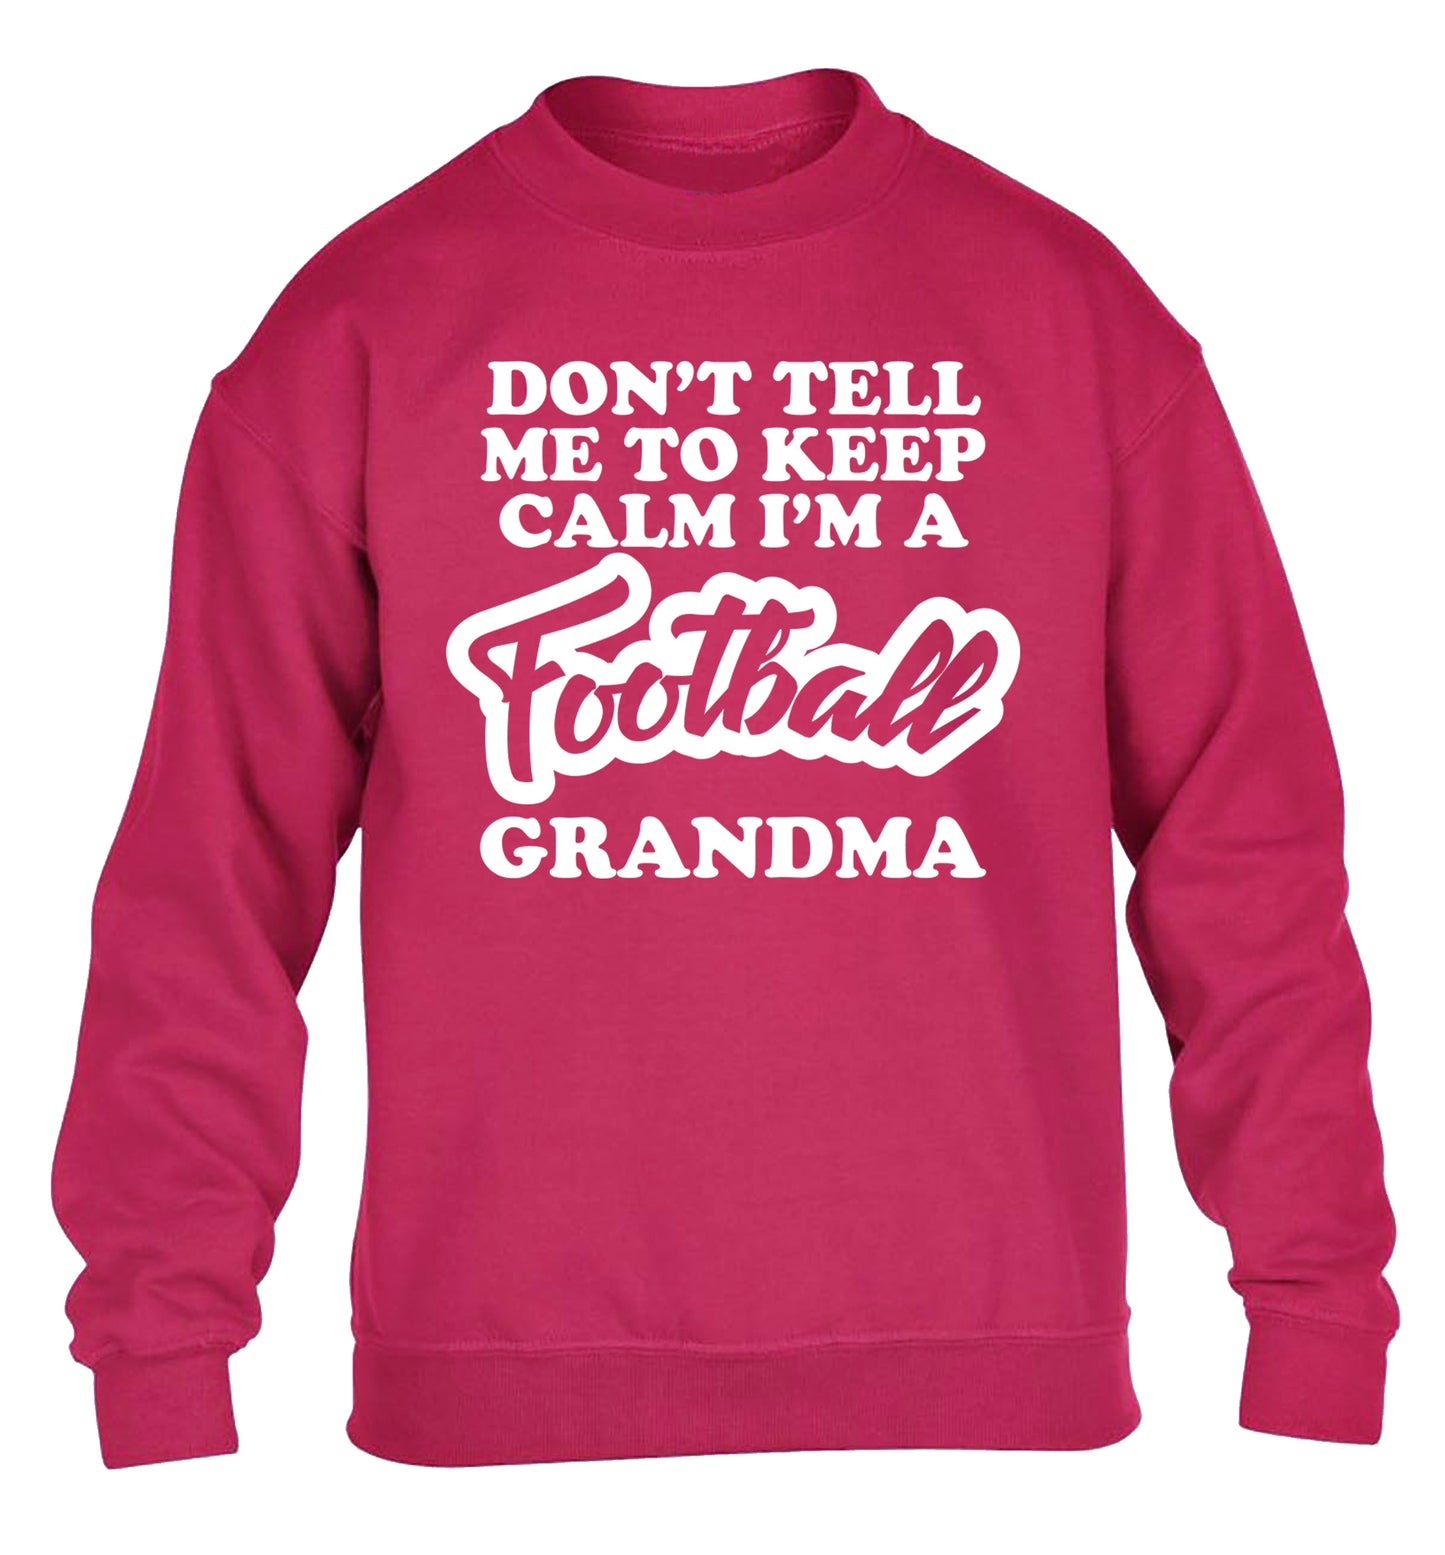 Don't tell me to keep calm I'm a football grandma children's pink sweater 12-14 Years